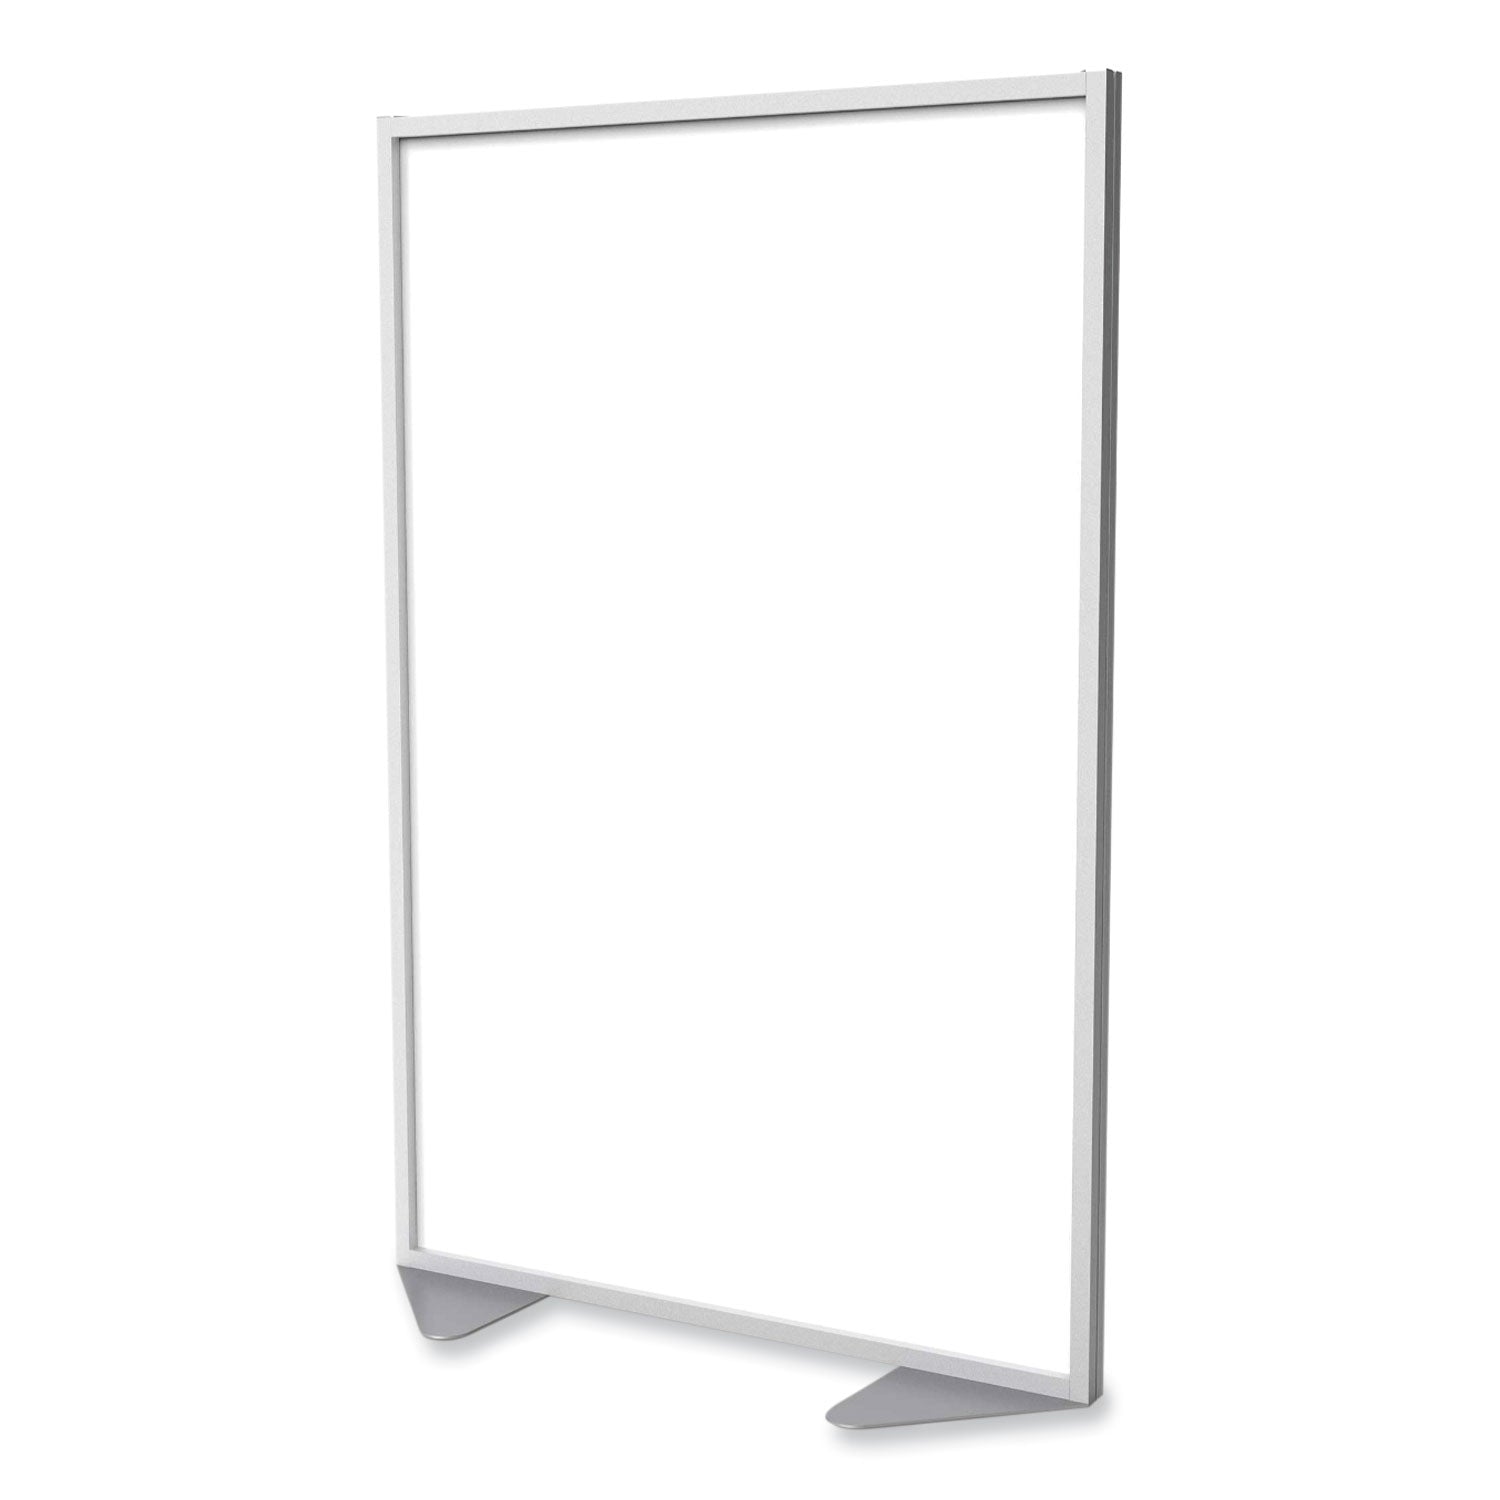 floor-partition-with-aluminum-frame-4806-x-204-x-5386-white-ships-in-7-10-business-days_ghemp544820 - 2